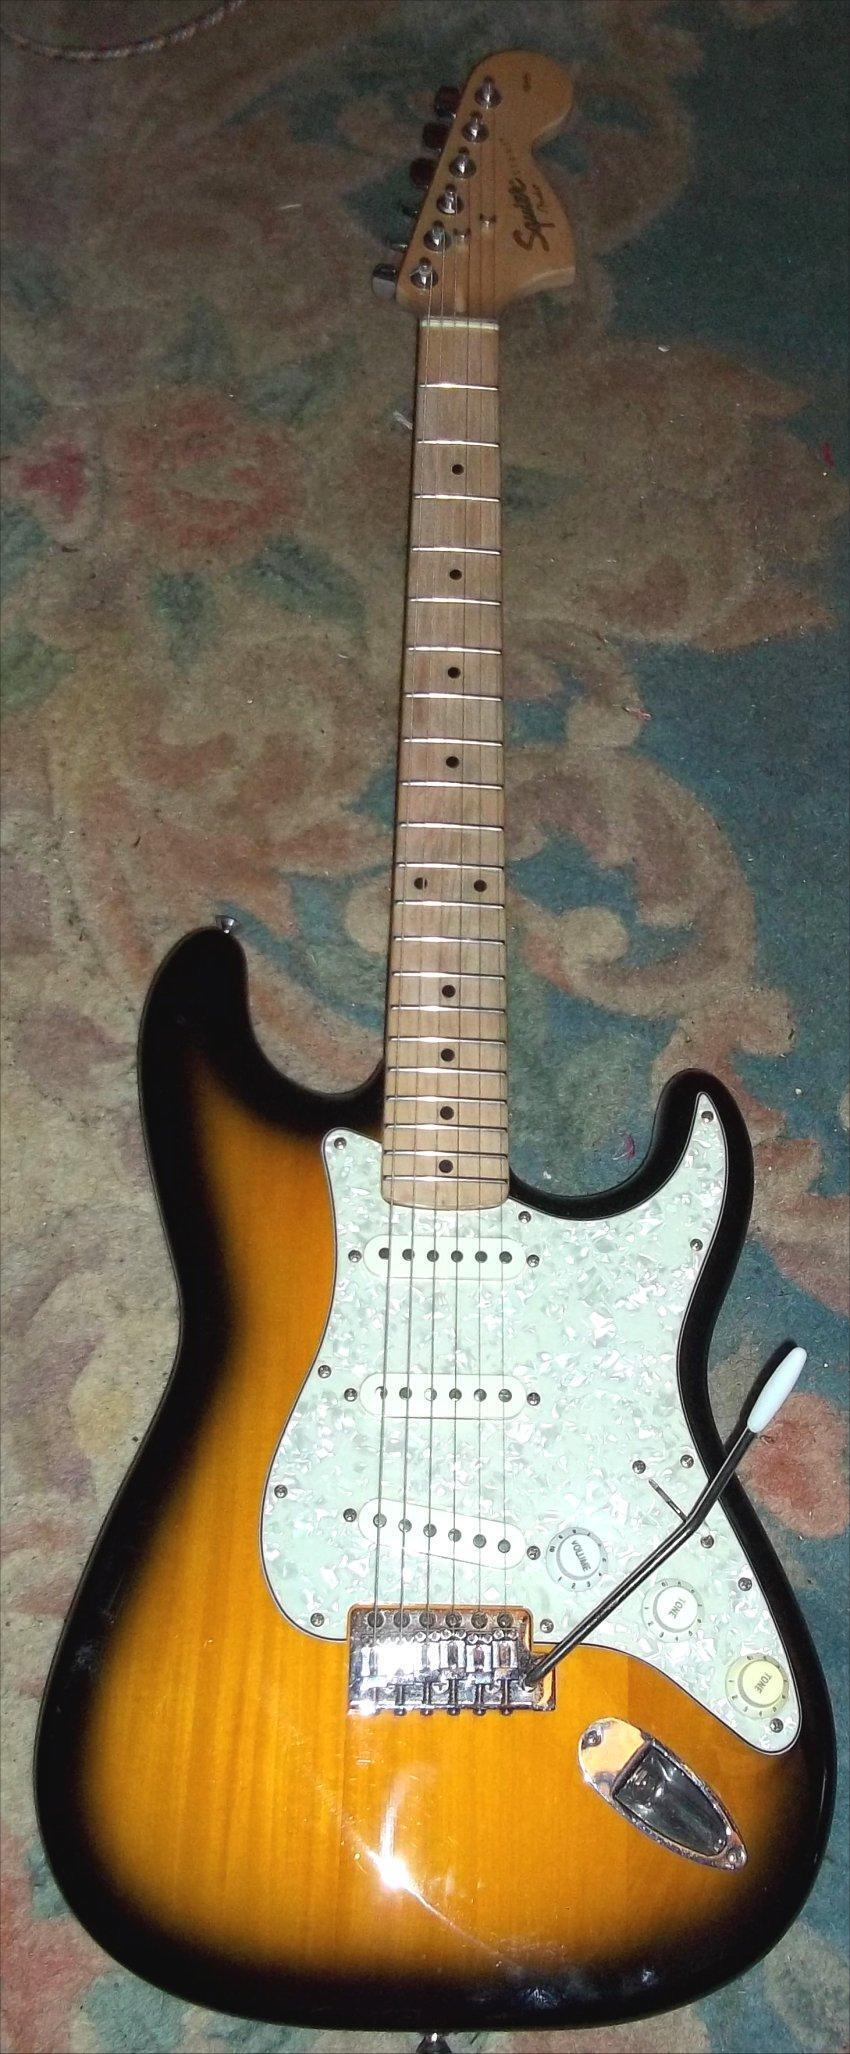 Used Squier STRATOCASTER Fender Squier Strat - Sweetwater's Gear